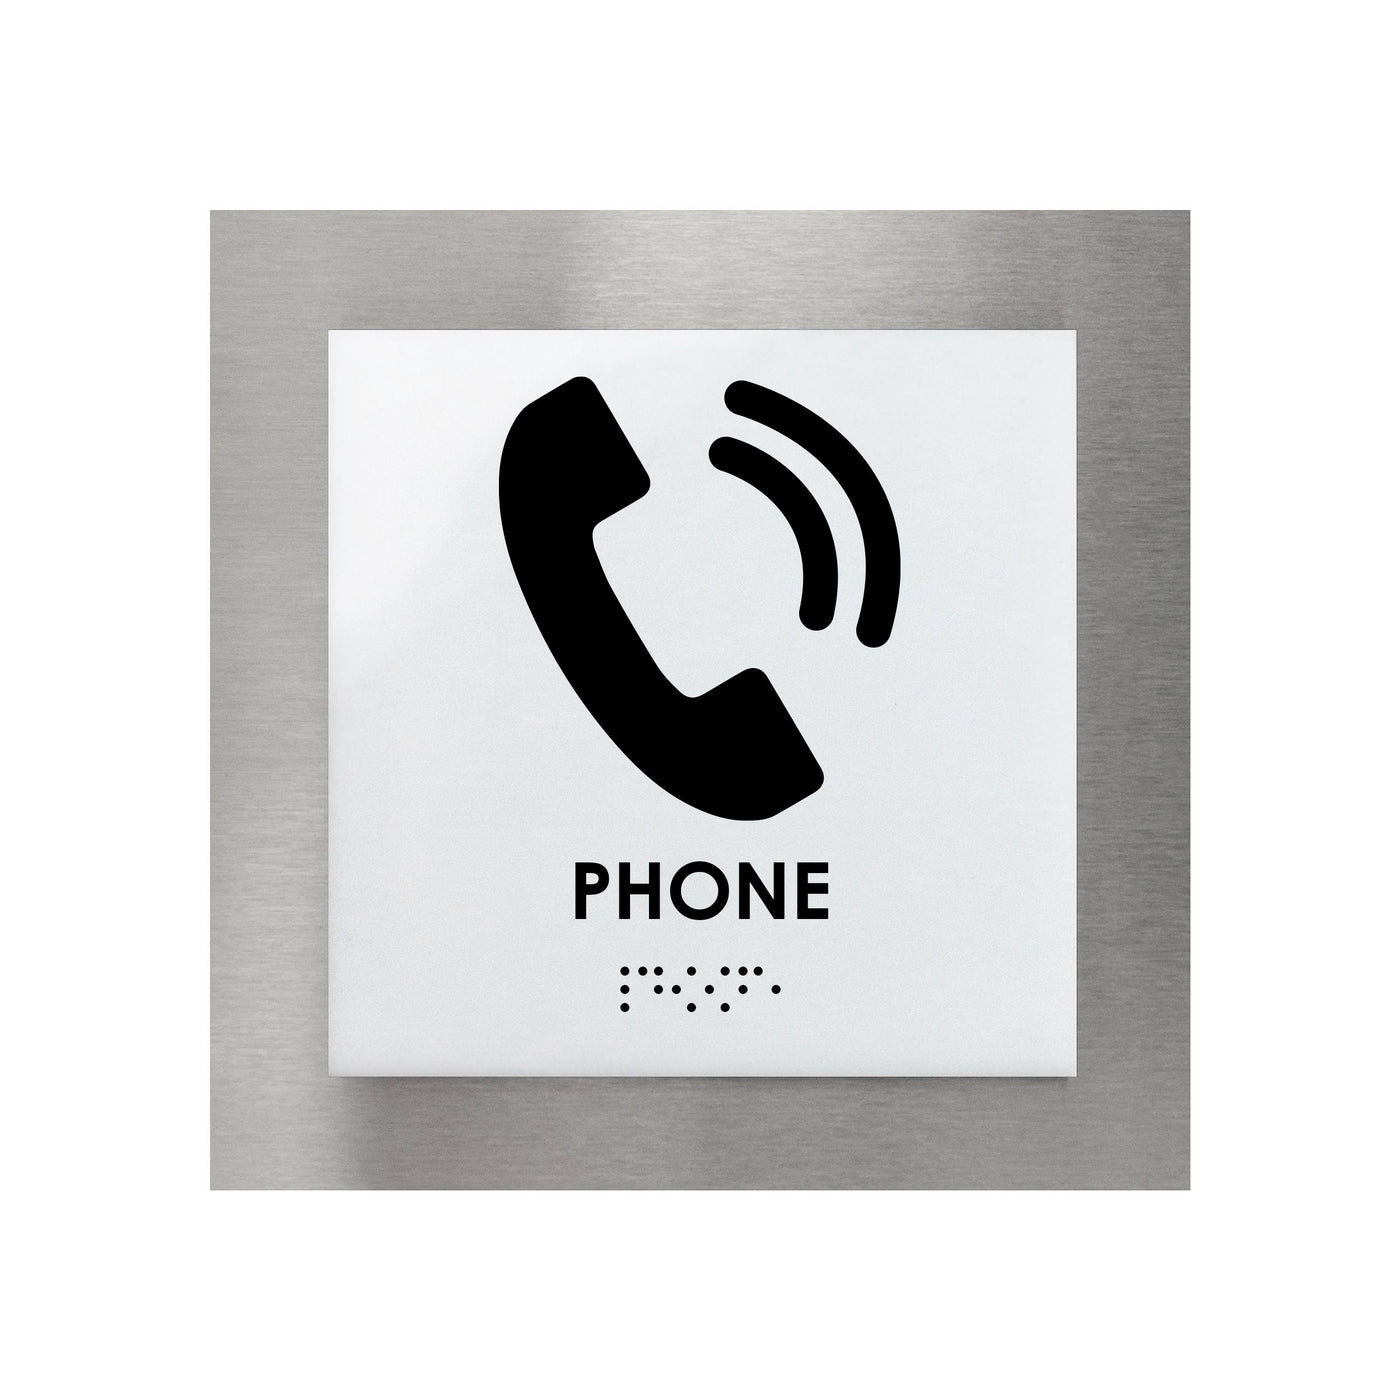 Information Signs - Steel Phone Sign With Braille "Modern" Design